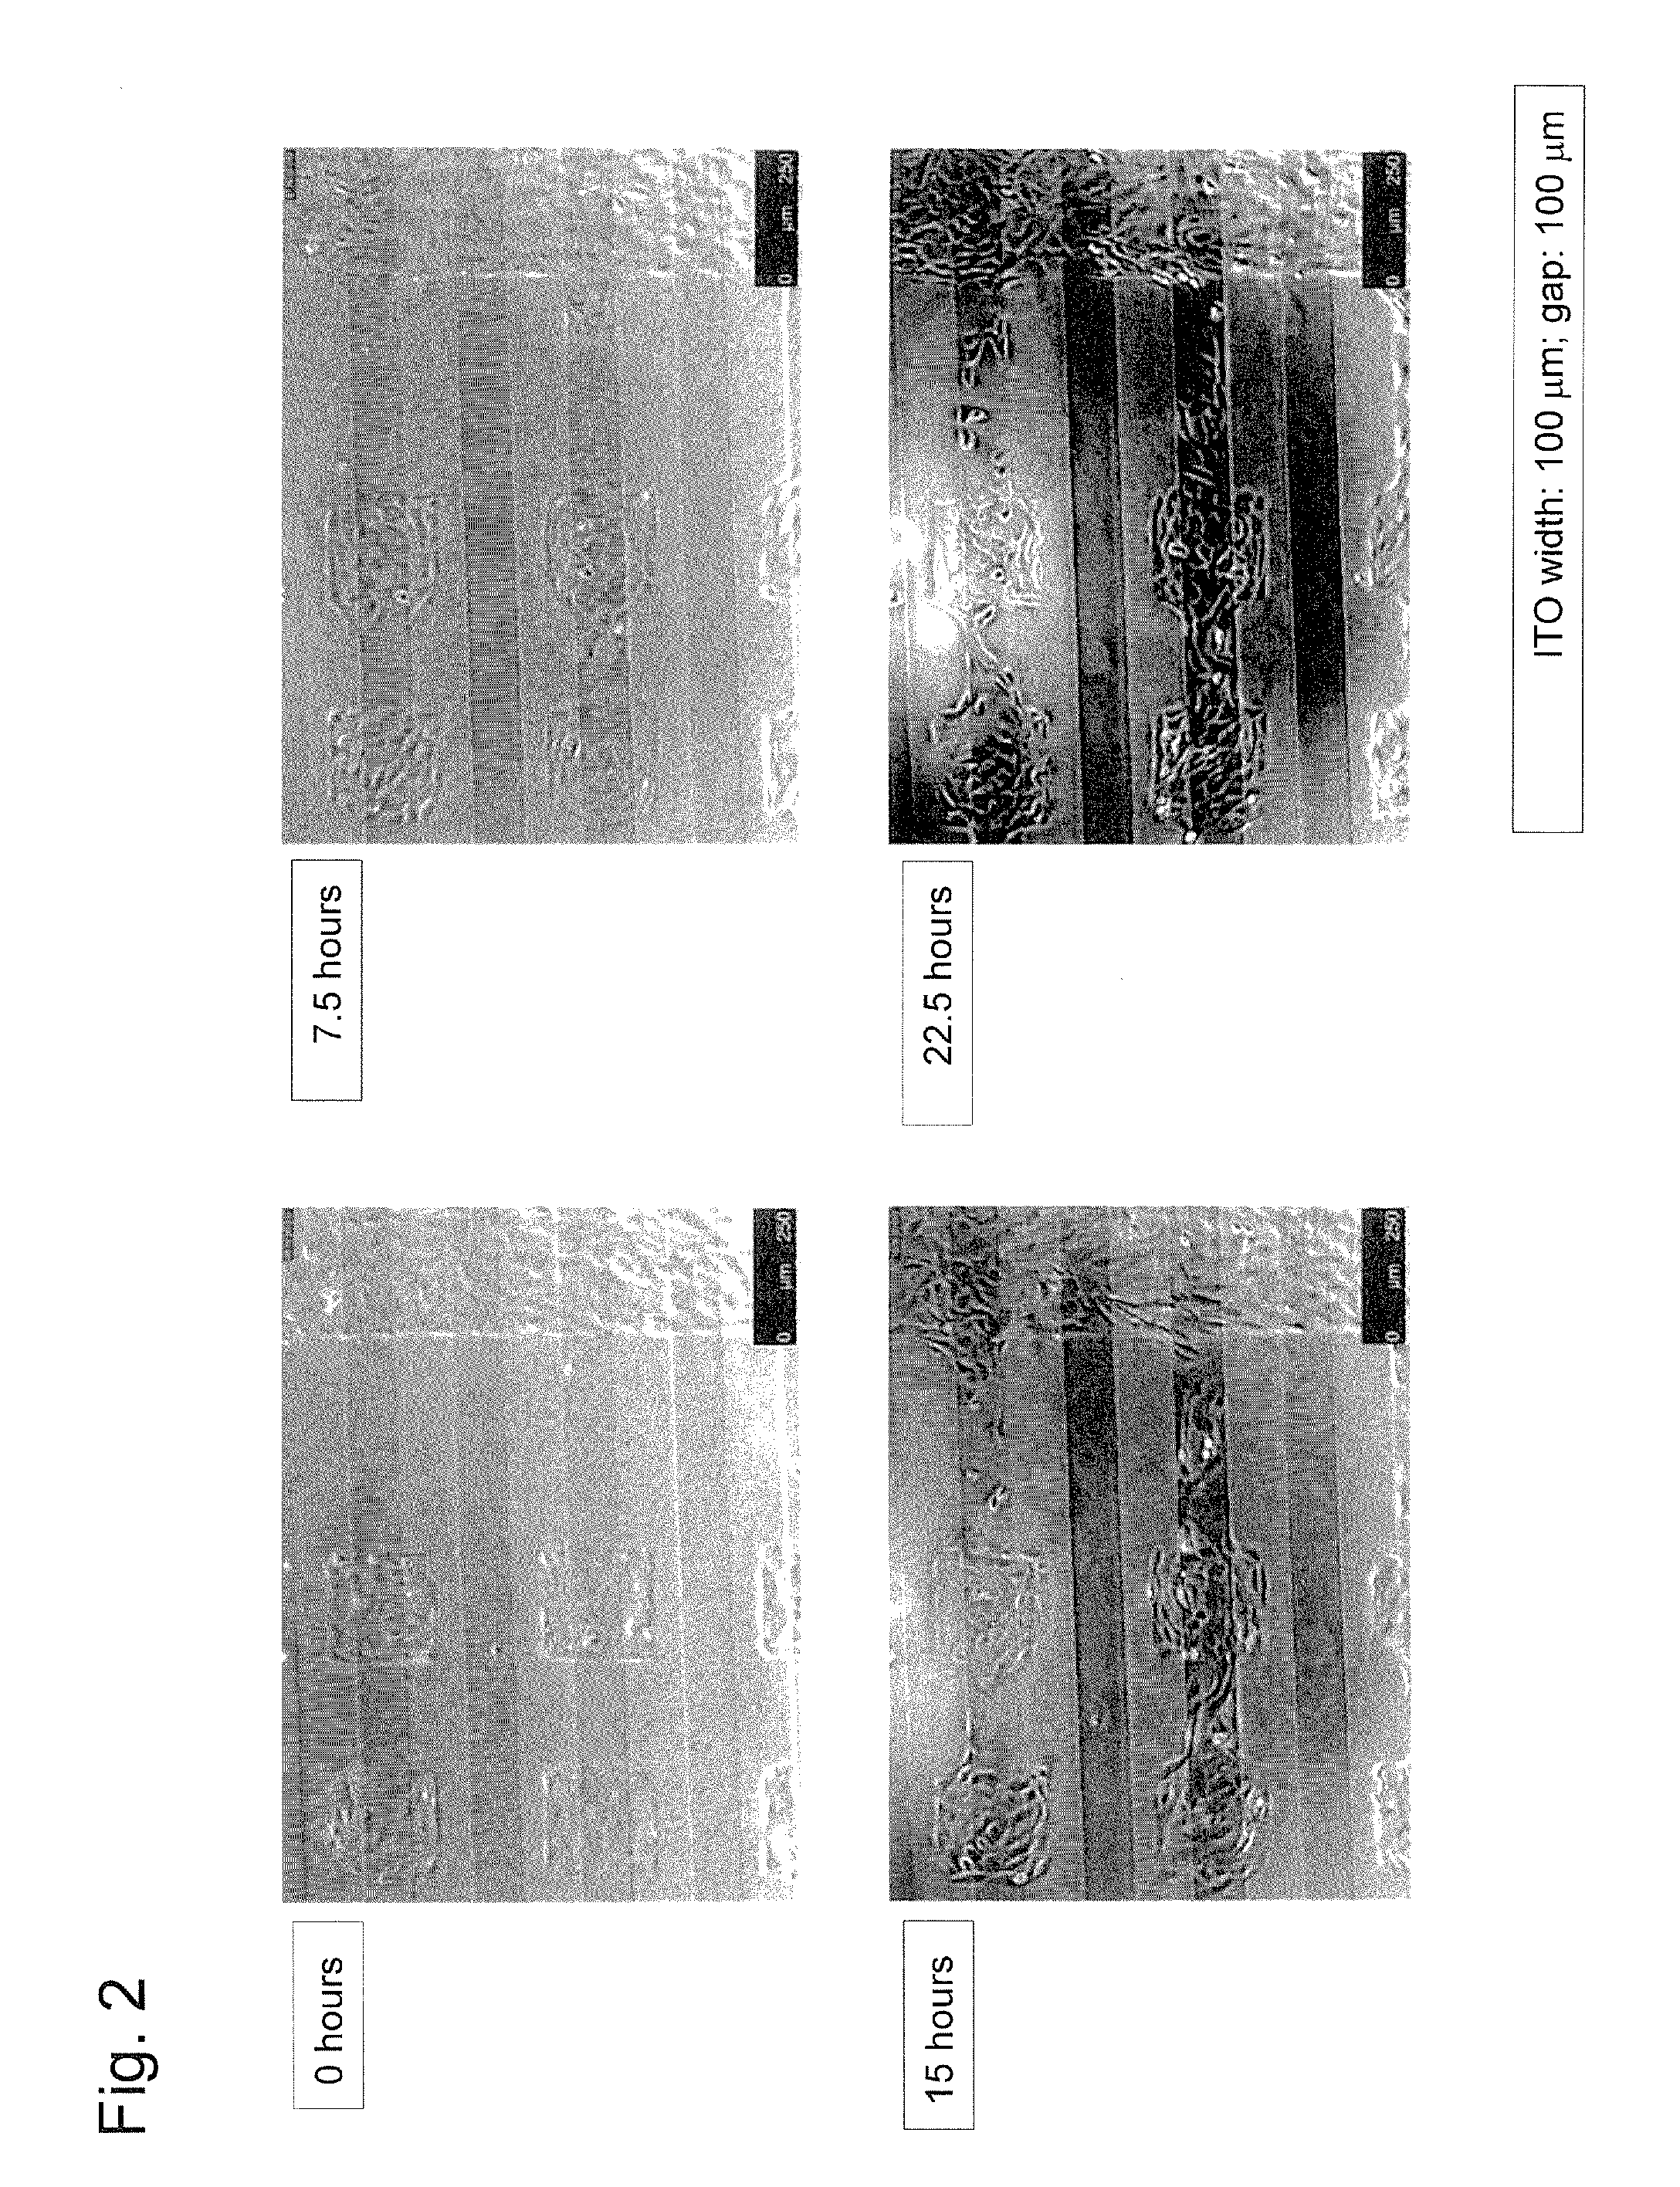 Substrate used for cell migration assays and method for cell migration assays